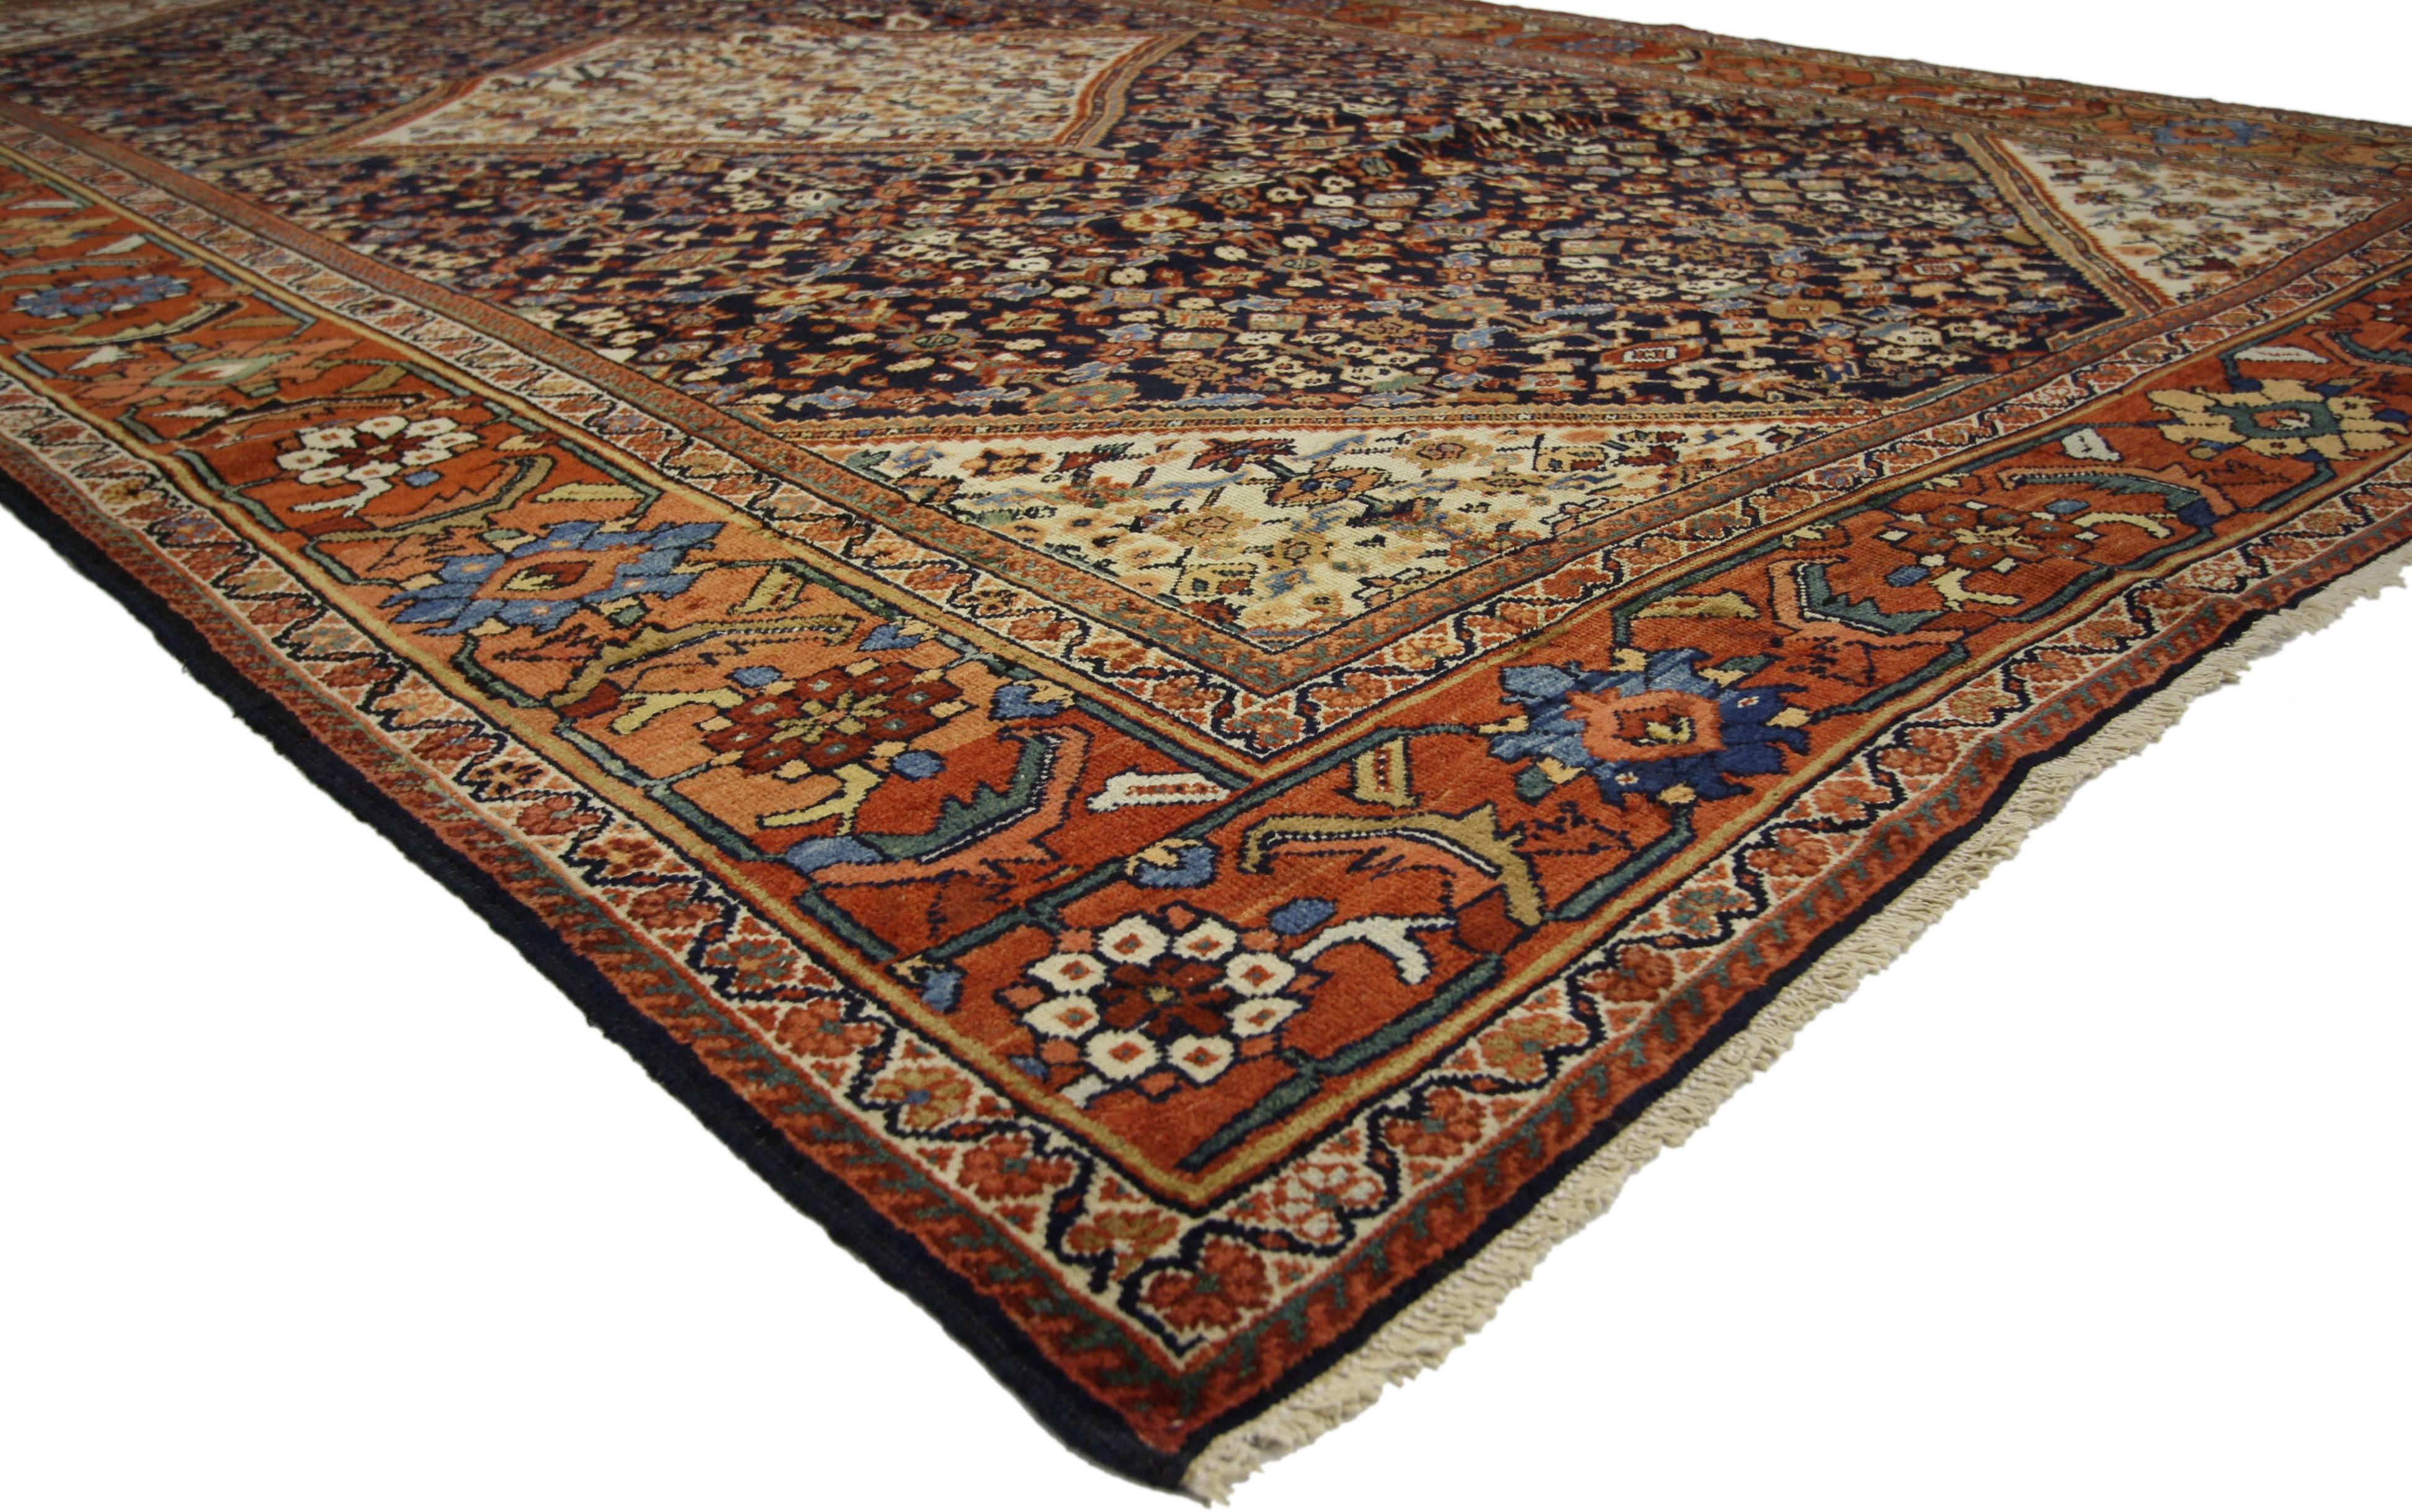 73200 Modern Antique Persian Mahal Area Rug with Transitional Style 08'06 x 13'00. Bold and full of character, this eccentric early 20th century Persian Mahal offers an opulent cornucopia of lively Herati motifs. With its bold elemental nature and